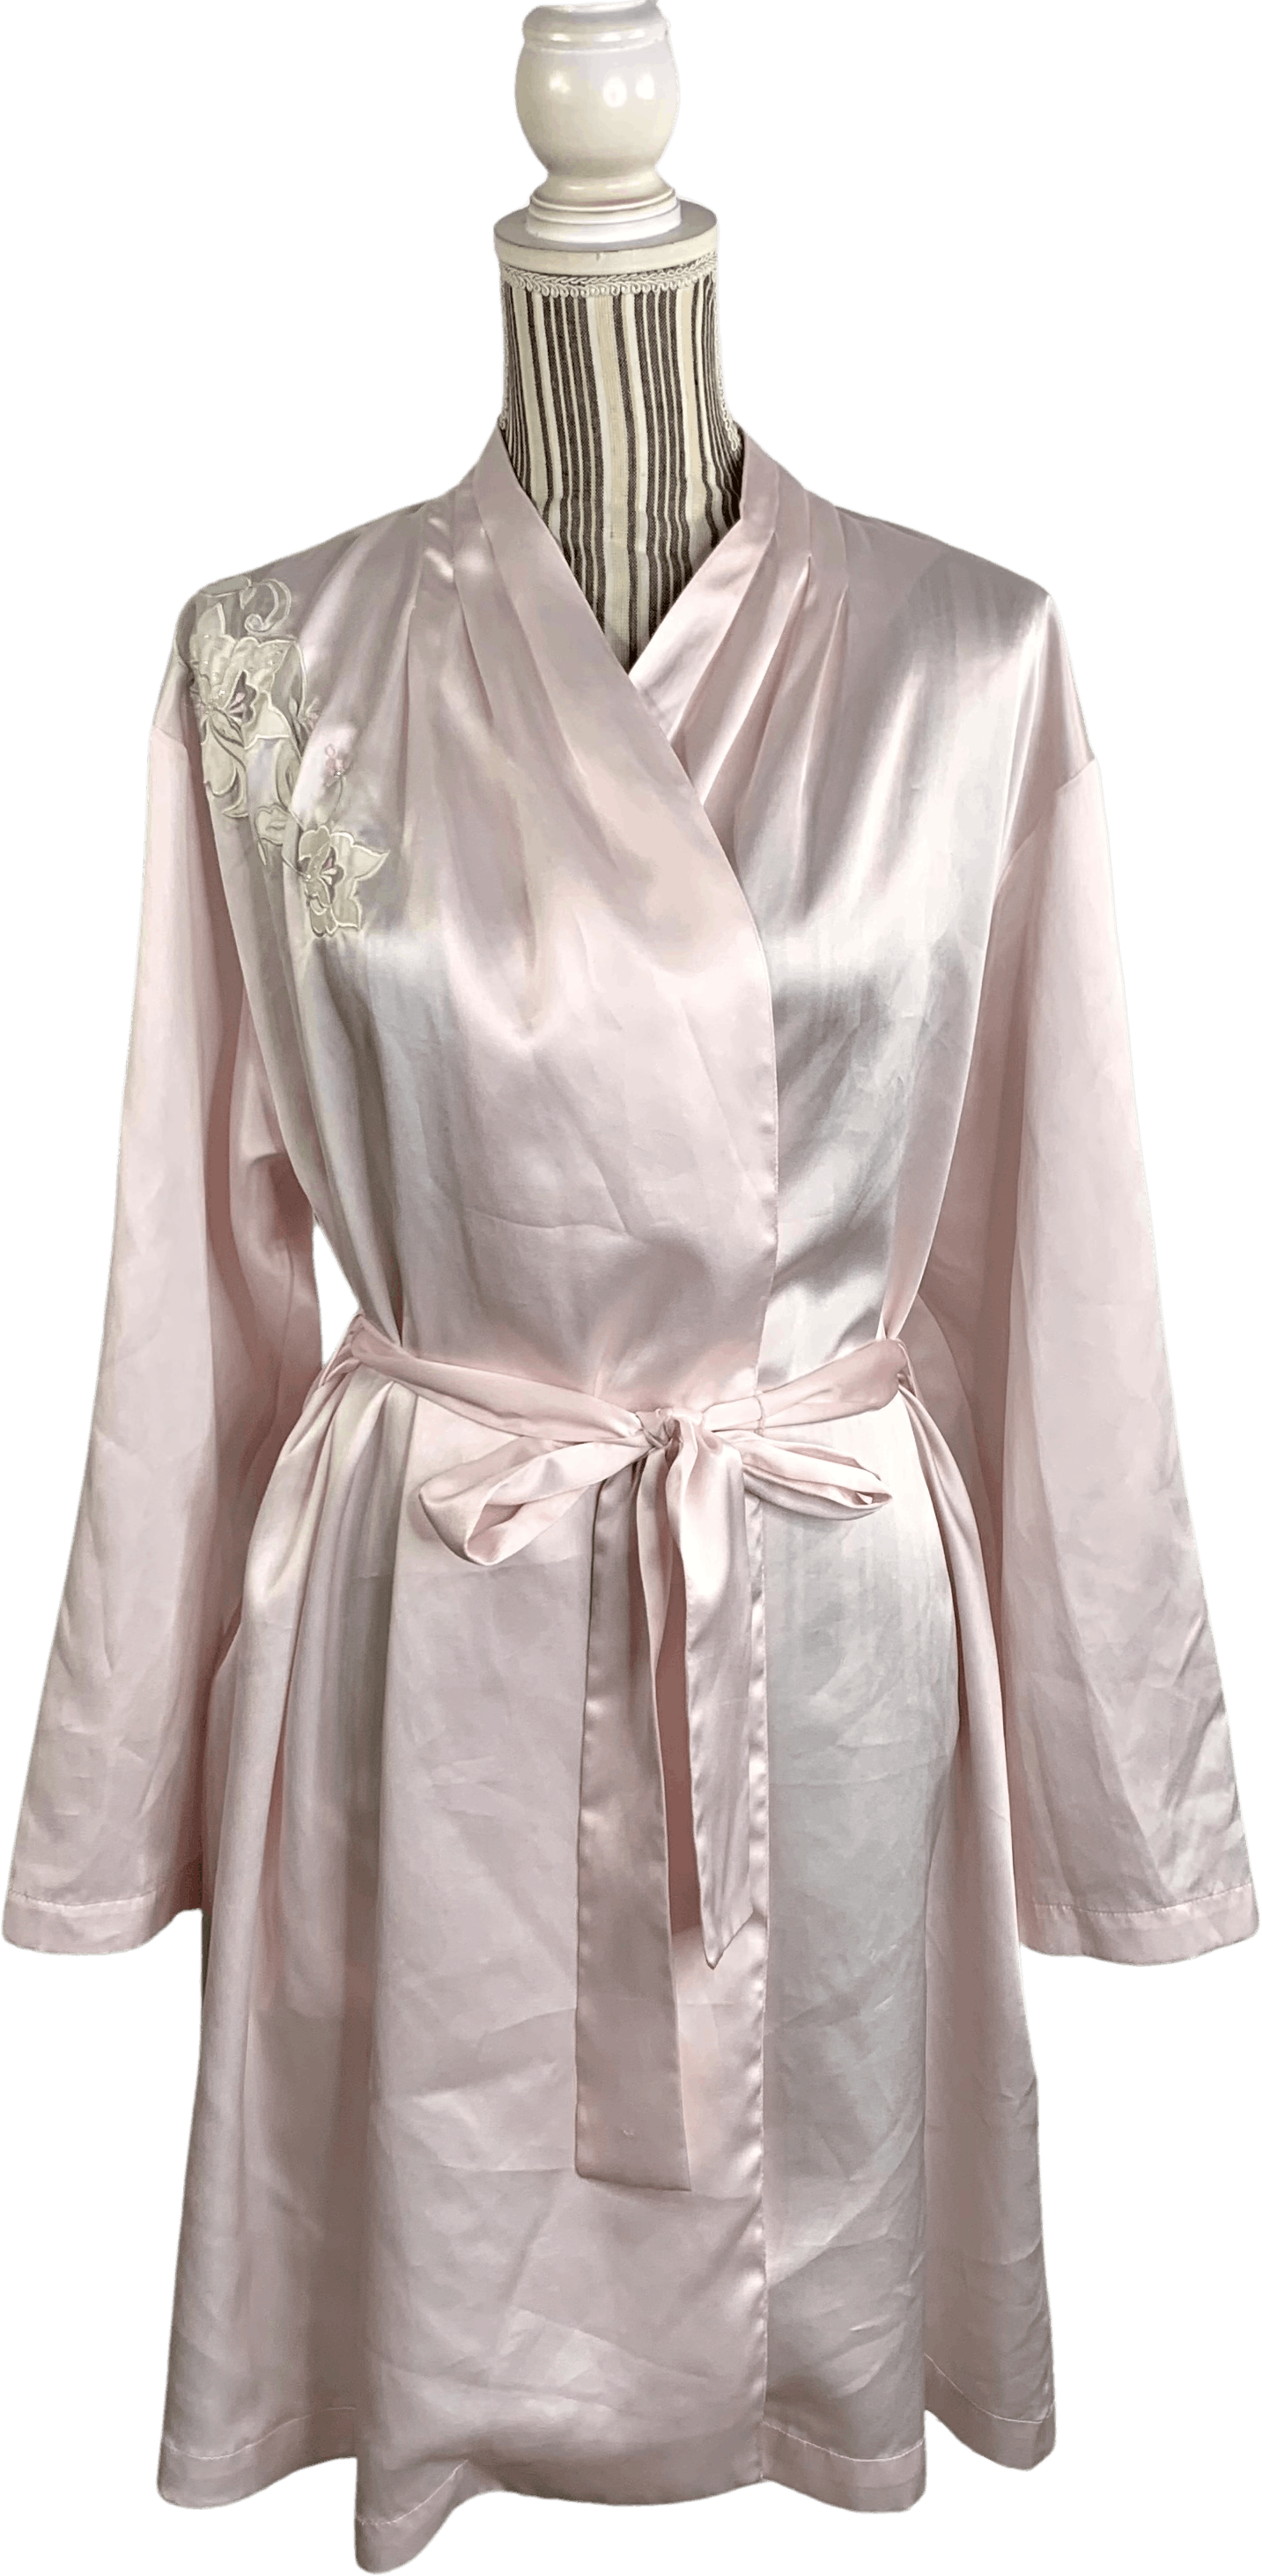 Vintage Pink Satin Robe with Floral Embroidery by Vandemere | Shop ...